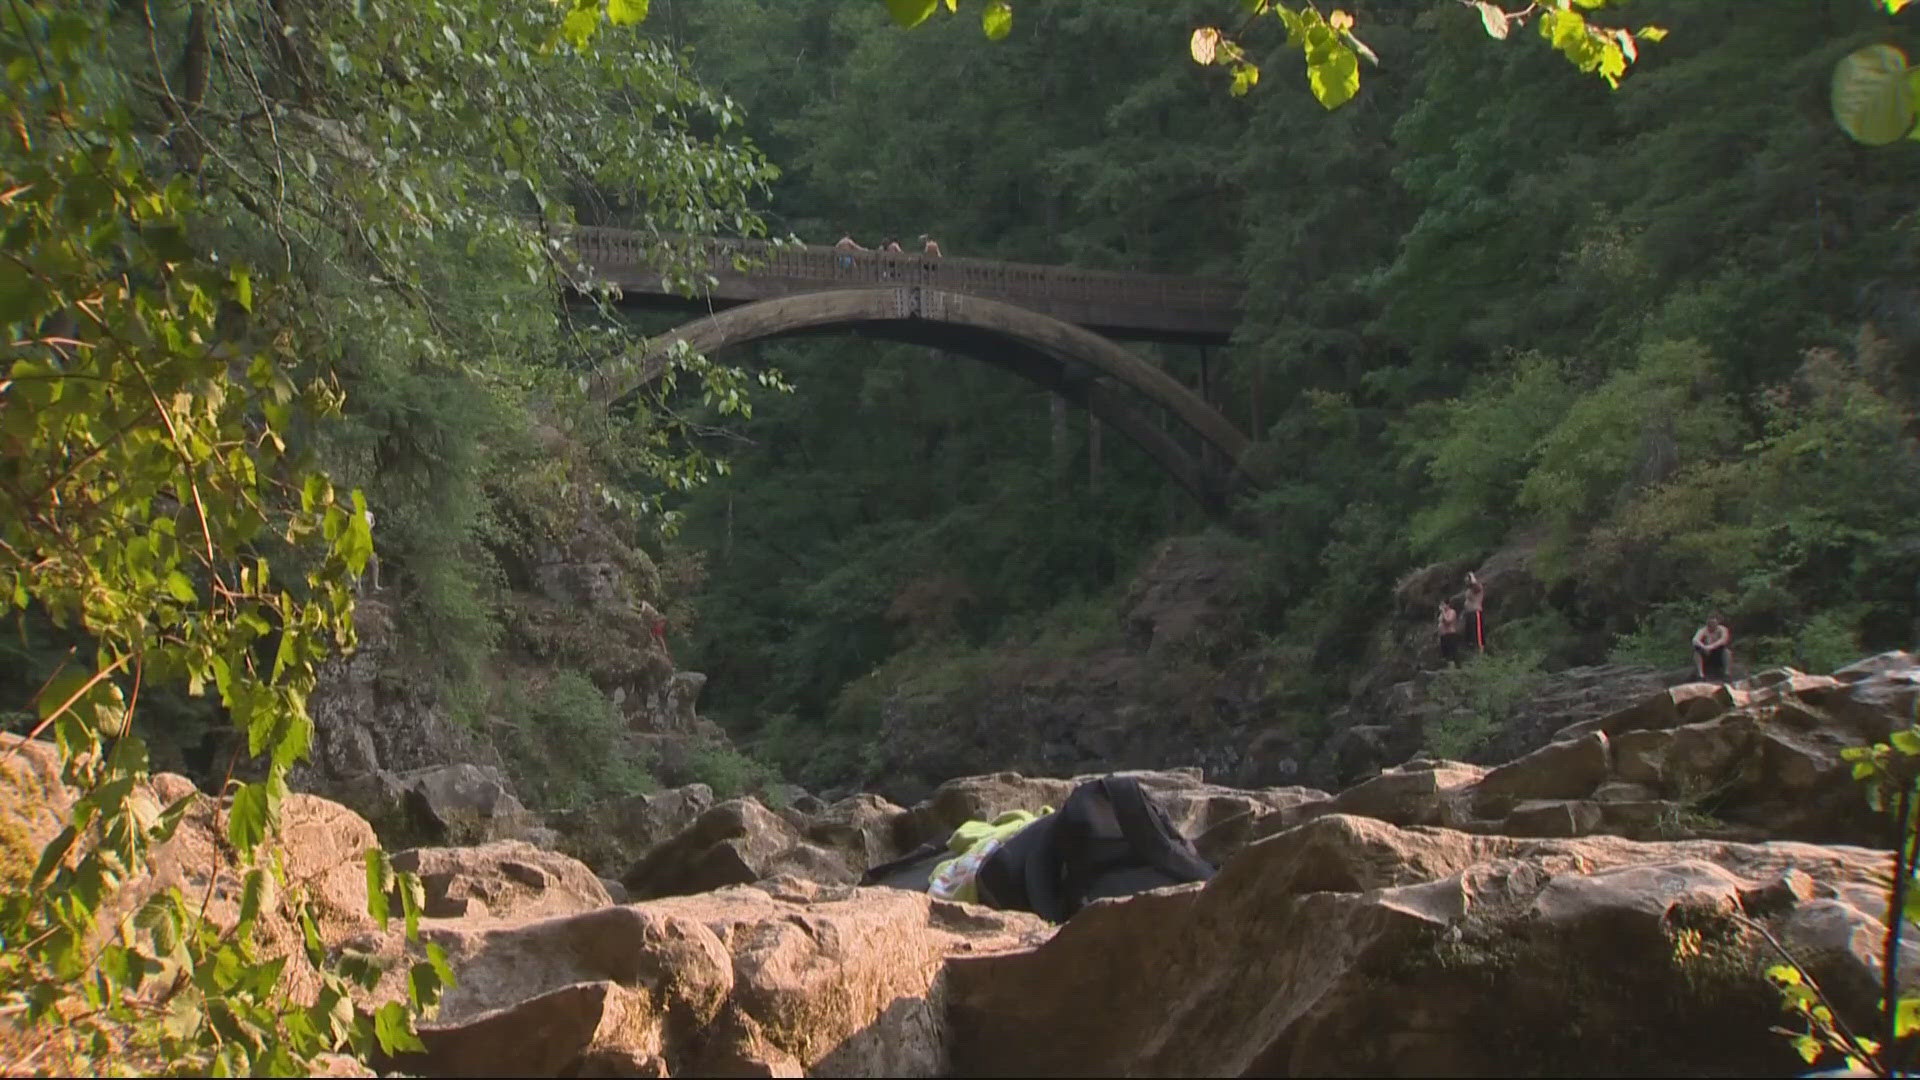 Officials say the man fell off a cliff then hit rocks at the bottom before tumbling into the water